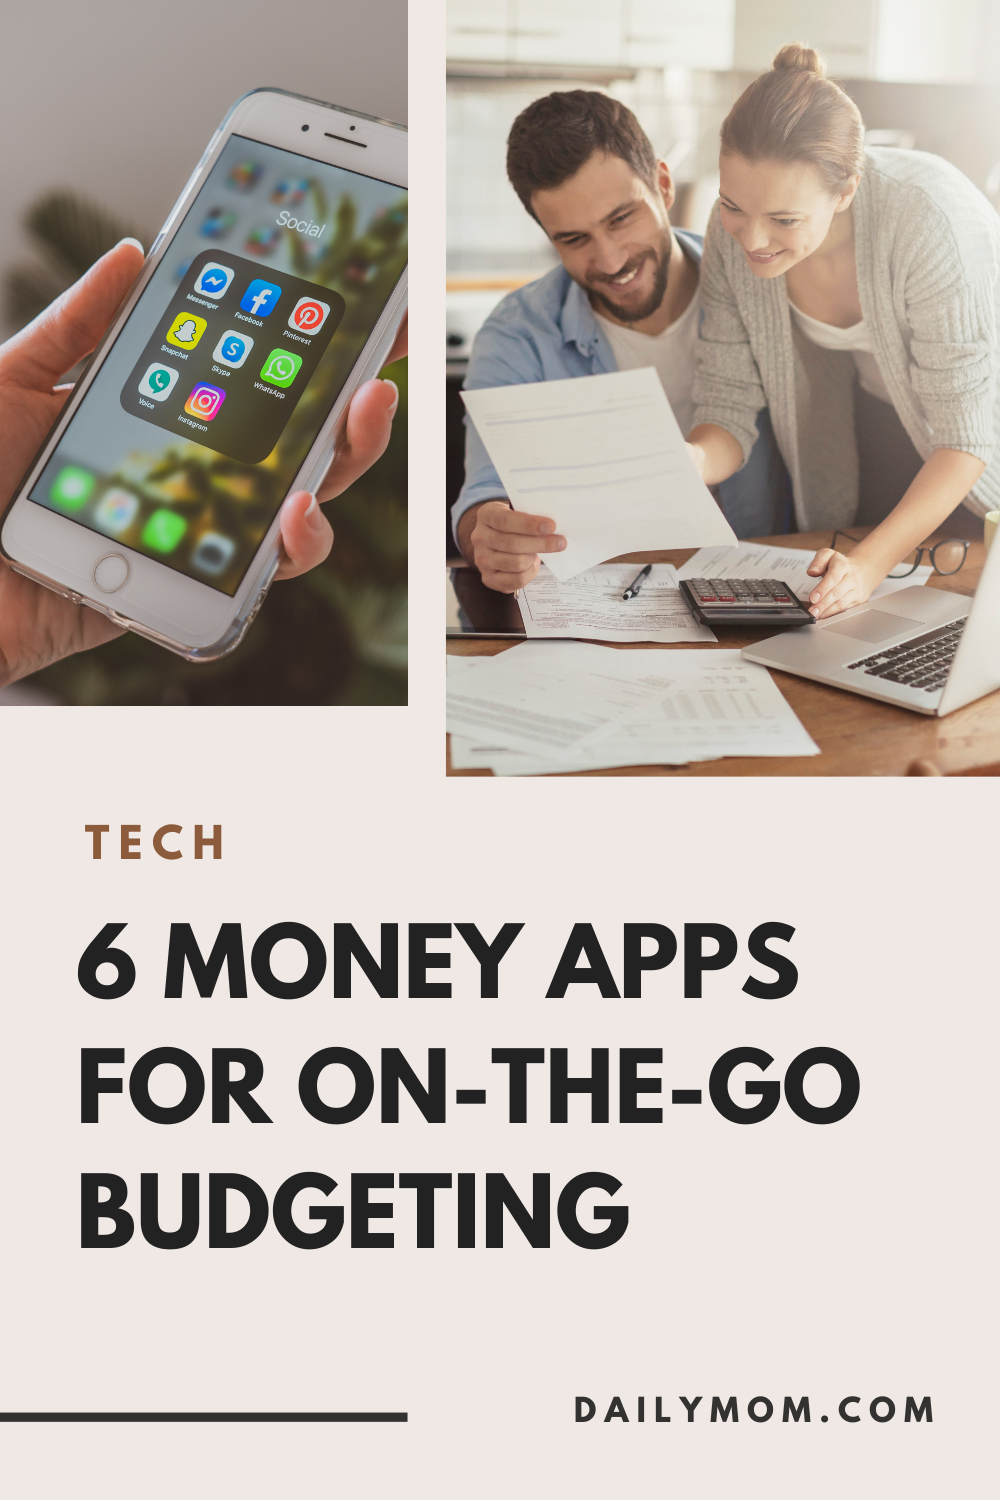 6 Money Apps For On-The-Go Budgeting